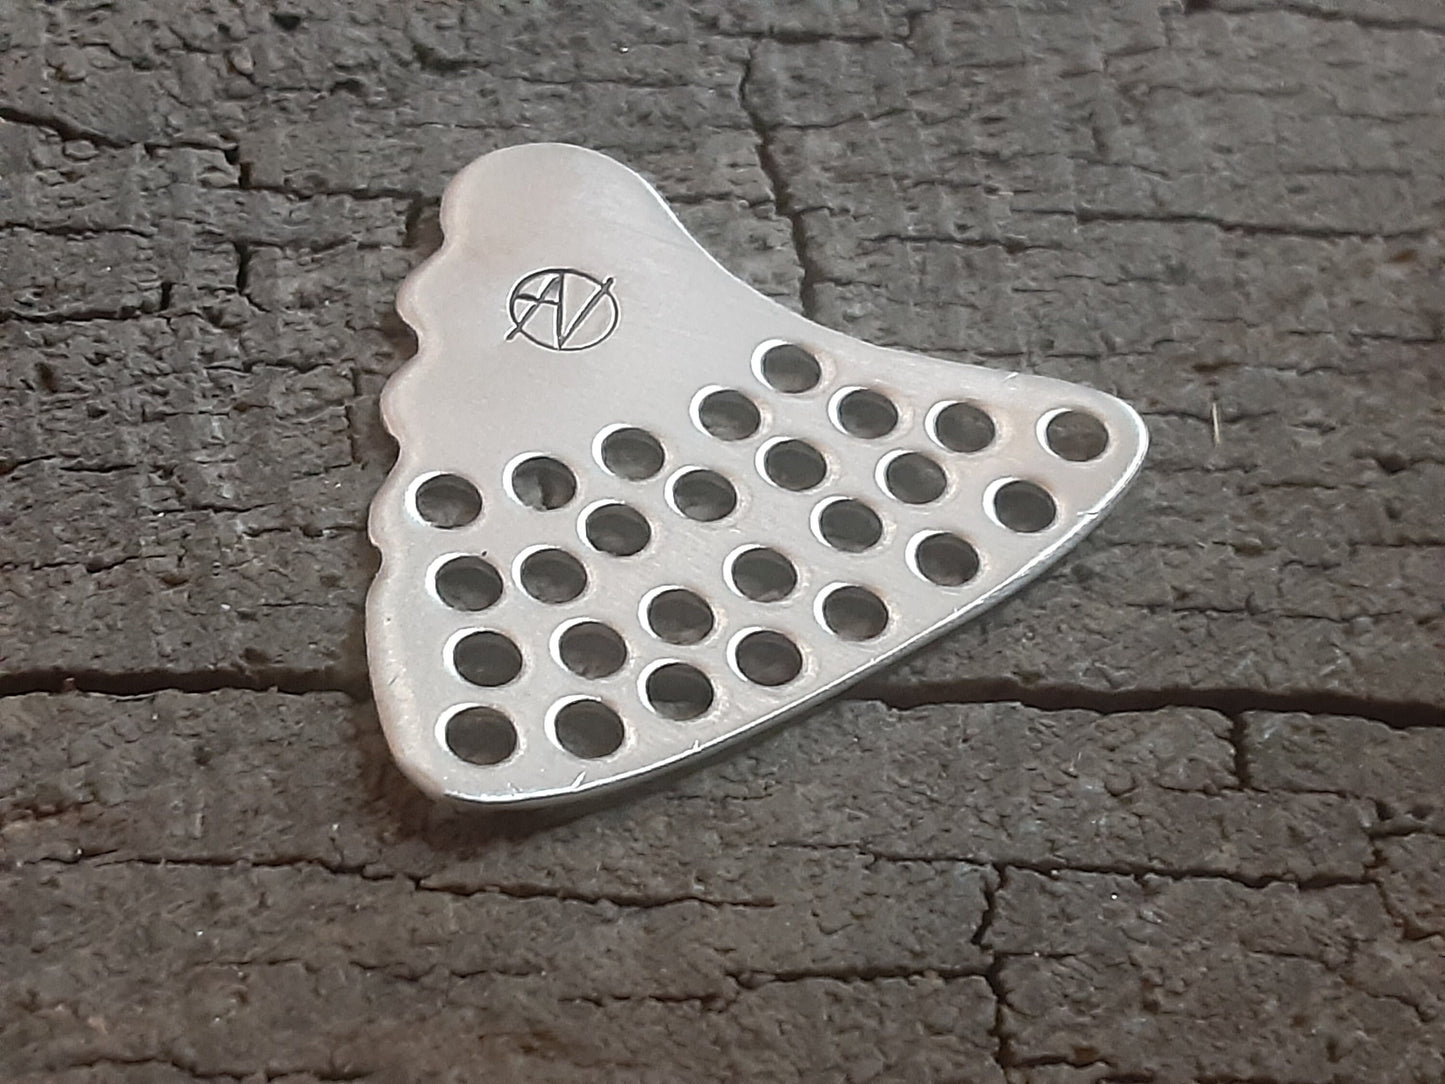 Shark tooth sterling silver guitar pick with hole punch outs